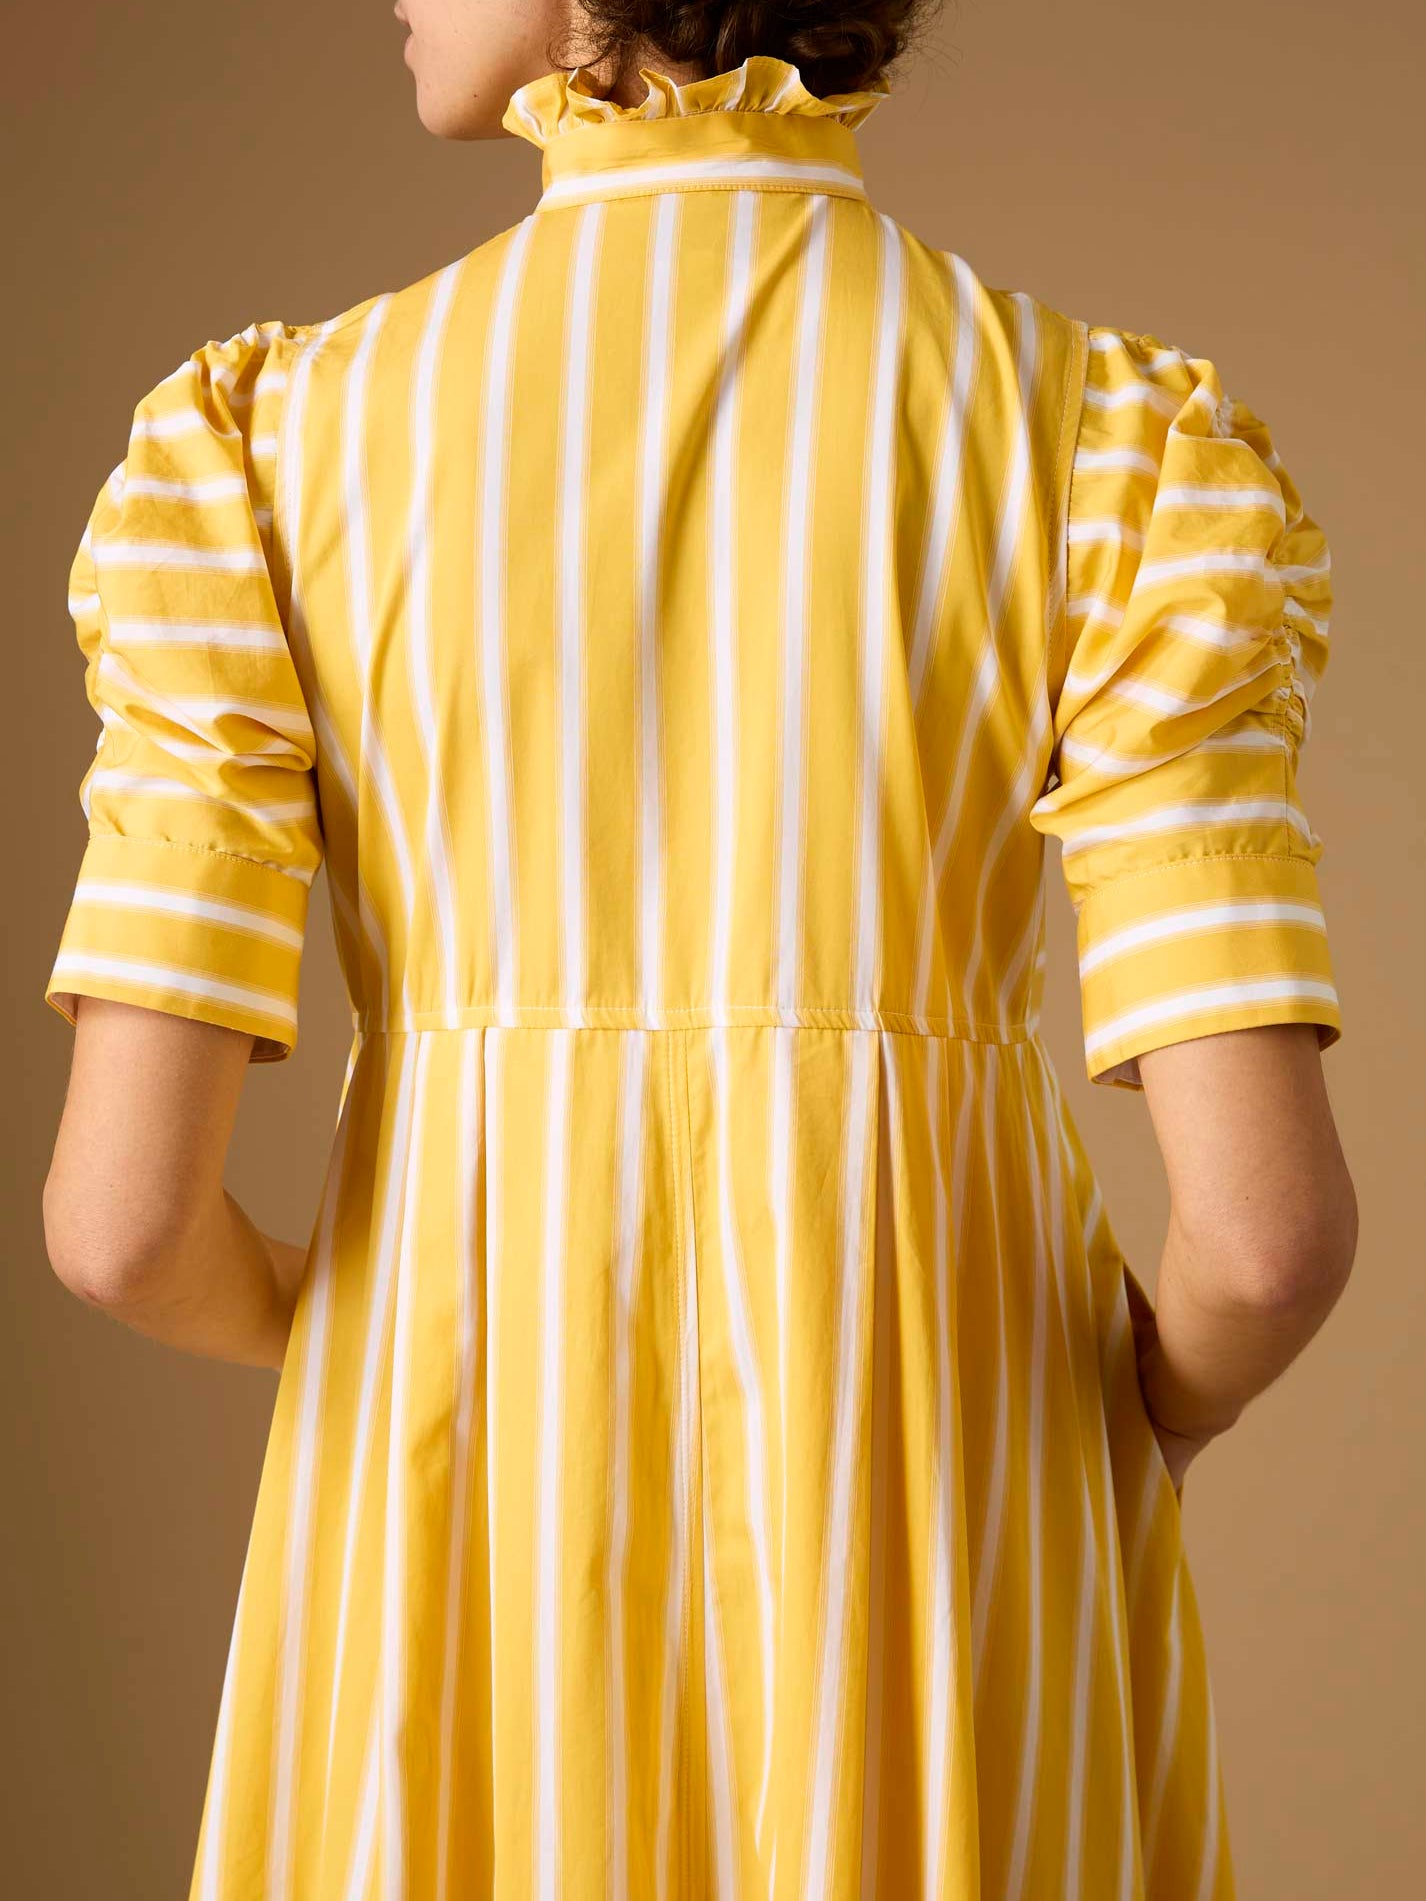 Back detail of Venetia Downing Poplin Yellow Dress by Thierry Colson